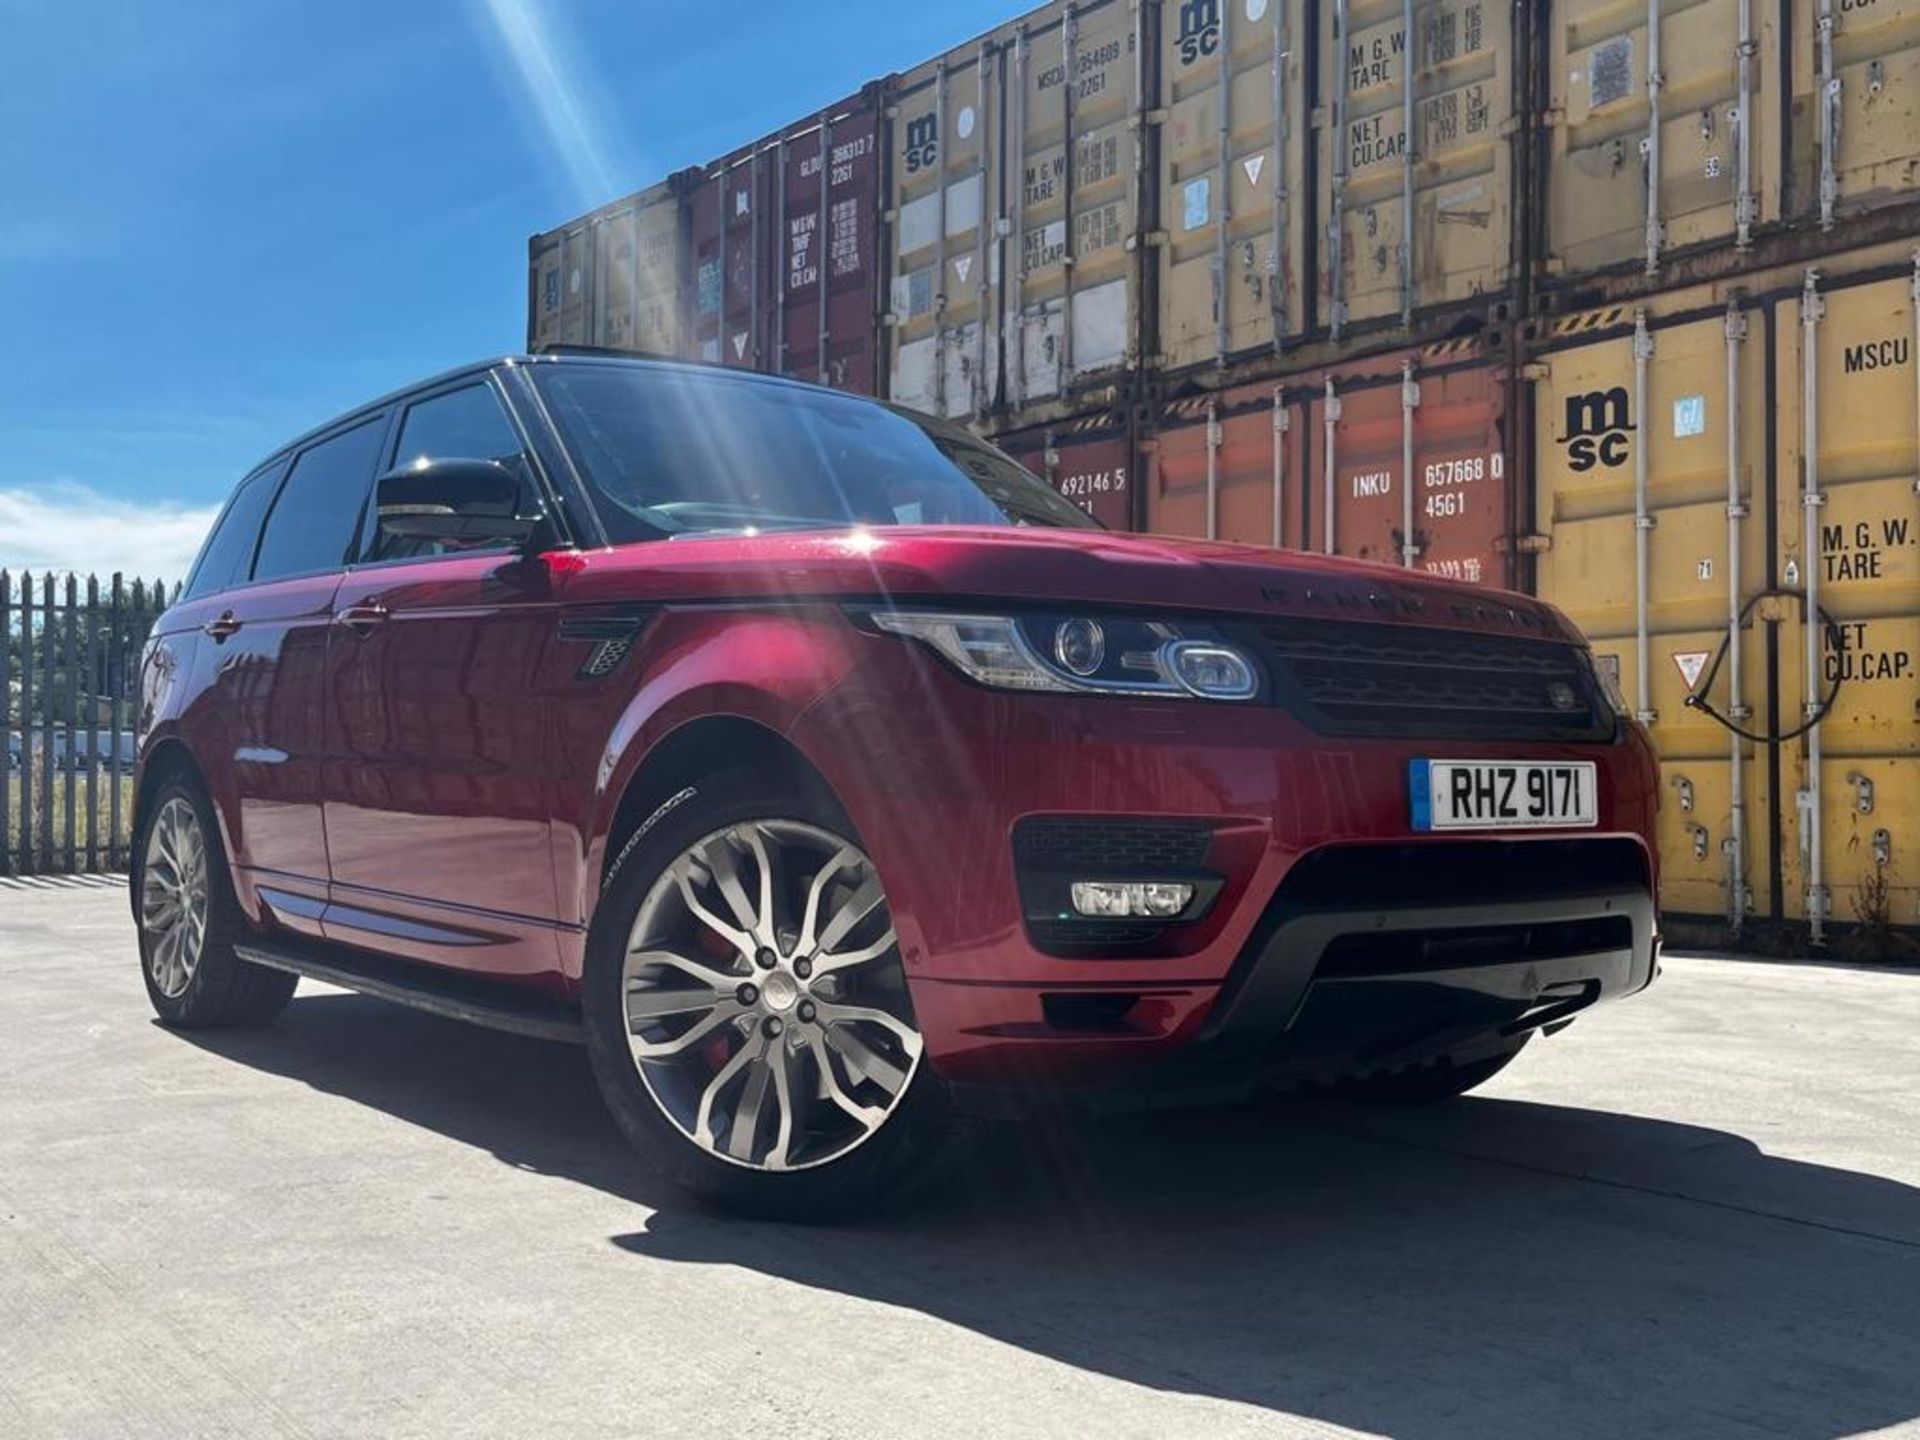 2014 LAND ROVER RANGE ROVER SPORT AUTOBIOGRAPHY DYNAMIC SDV8 AUTOMATIC RED *PLUS VAT*